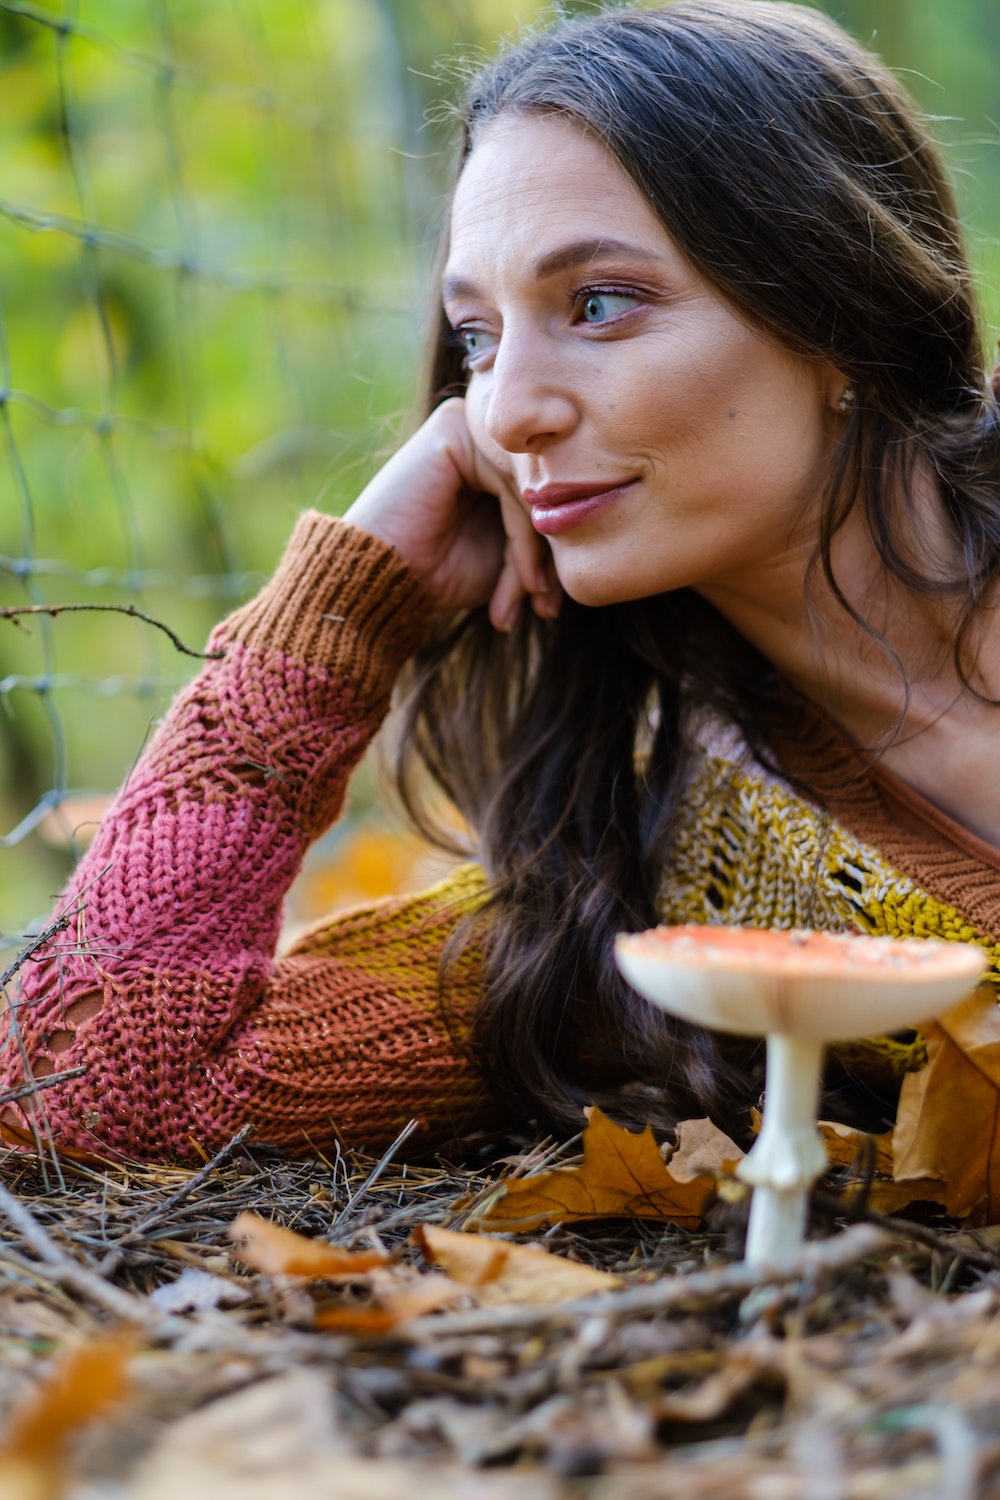 Psychedelics Help Treat Eating Disorders